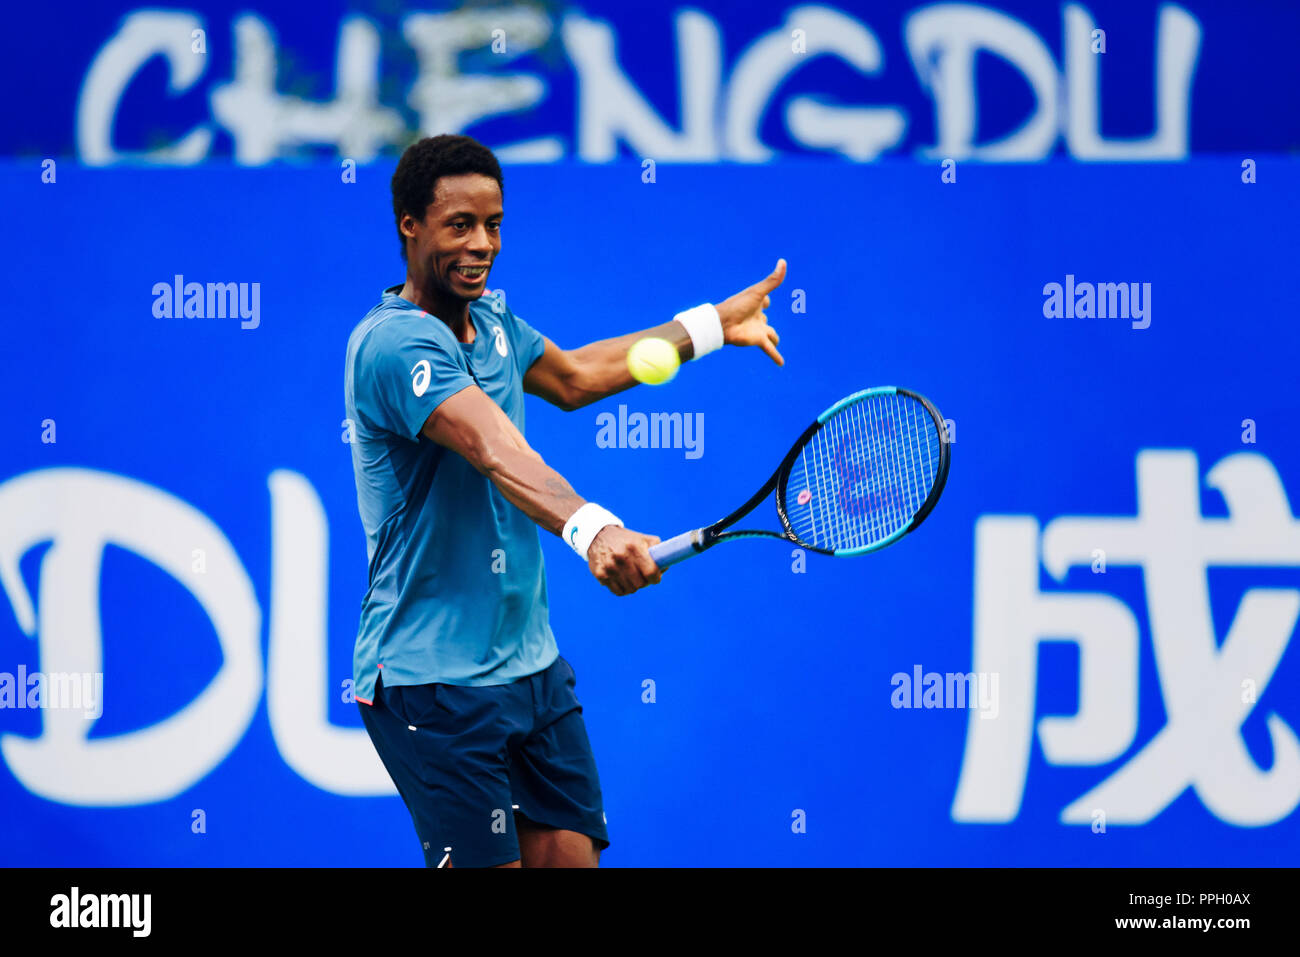 Chengdu, Chengdu, China. 26th Sep, 2018. Chengdu, CHINA-French tennis  player Andrew Harris defeats Gaeln Monfils 2-1 at the 2018 ATP Chengdu Open  in Chengdu, southwest ChinaÃ¢â‚¬â„¢s Sichuan Province, September 25th, 2018.  Credit: